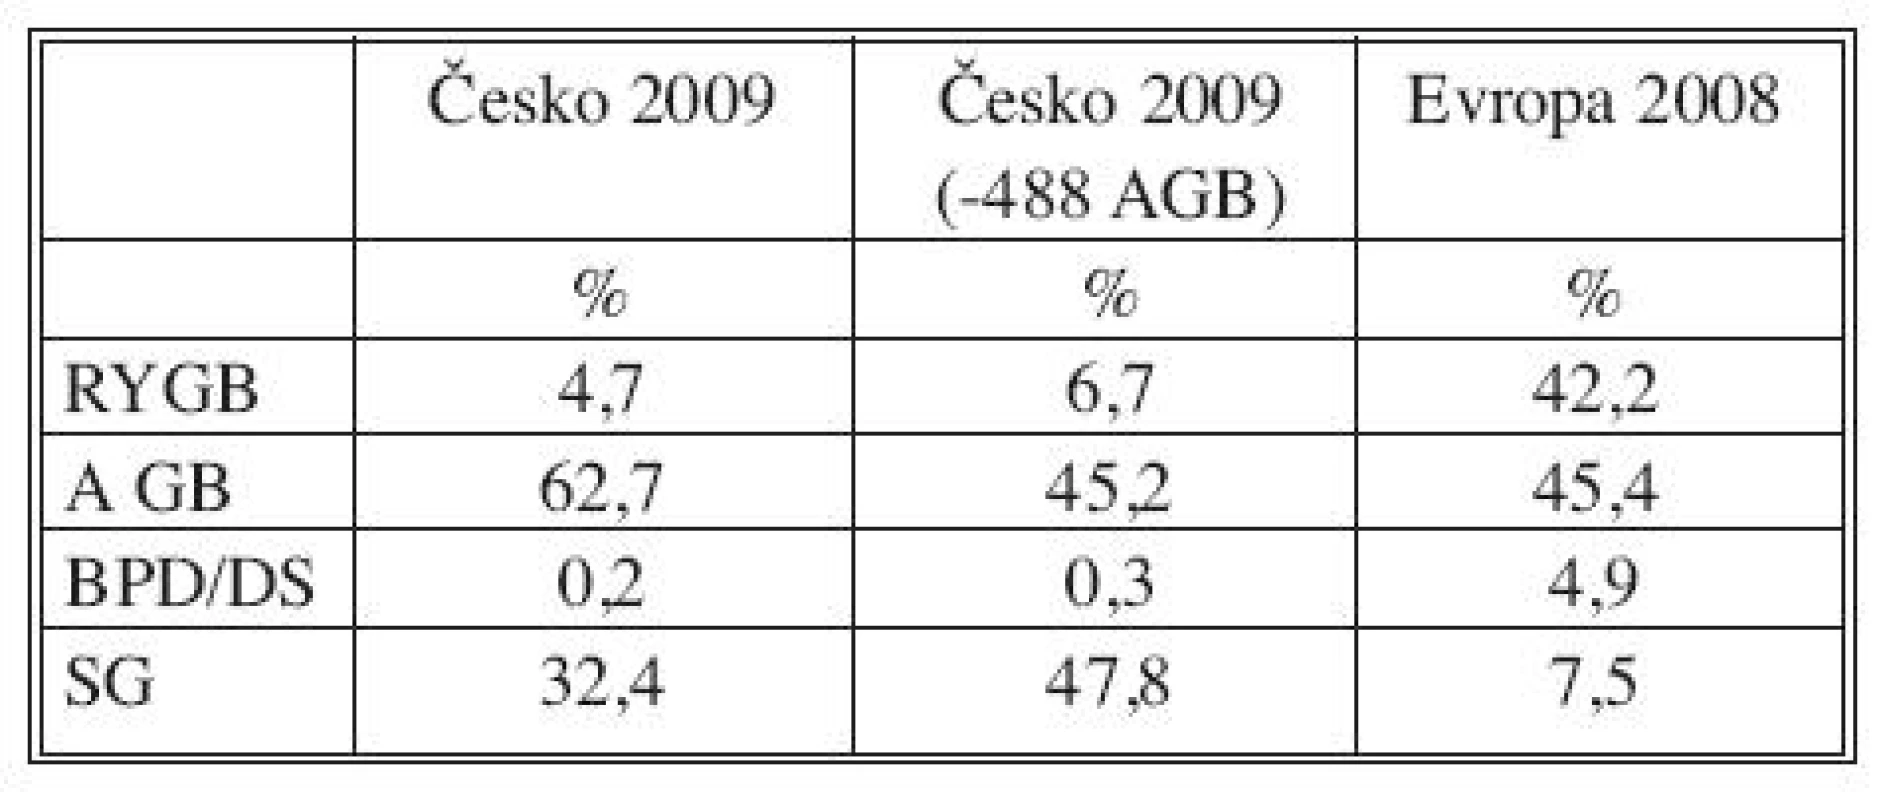 Porovnání percentuálního podílu jednotlivých bariatrických operací za rok 2009 s Evropou za rok 2008
Tab. 5. Comparison between the percentage rates of individual bariatric procedures in the Czech Republic in 2009 and in Europe in 2008
